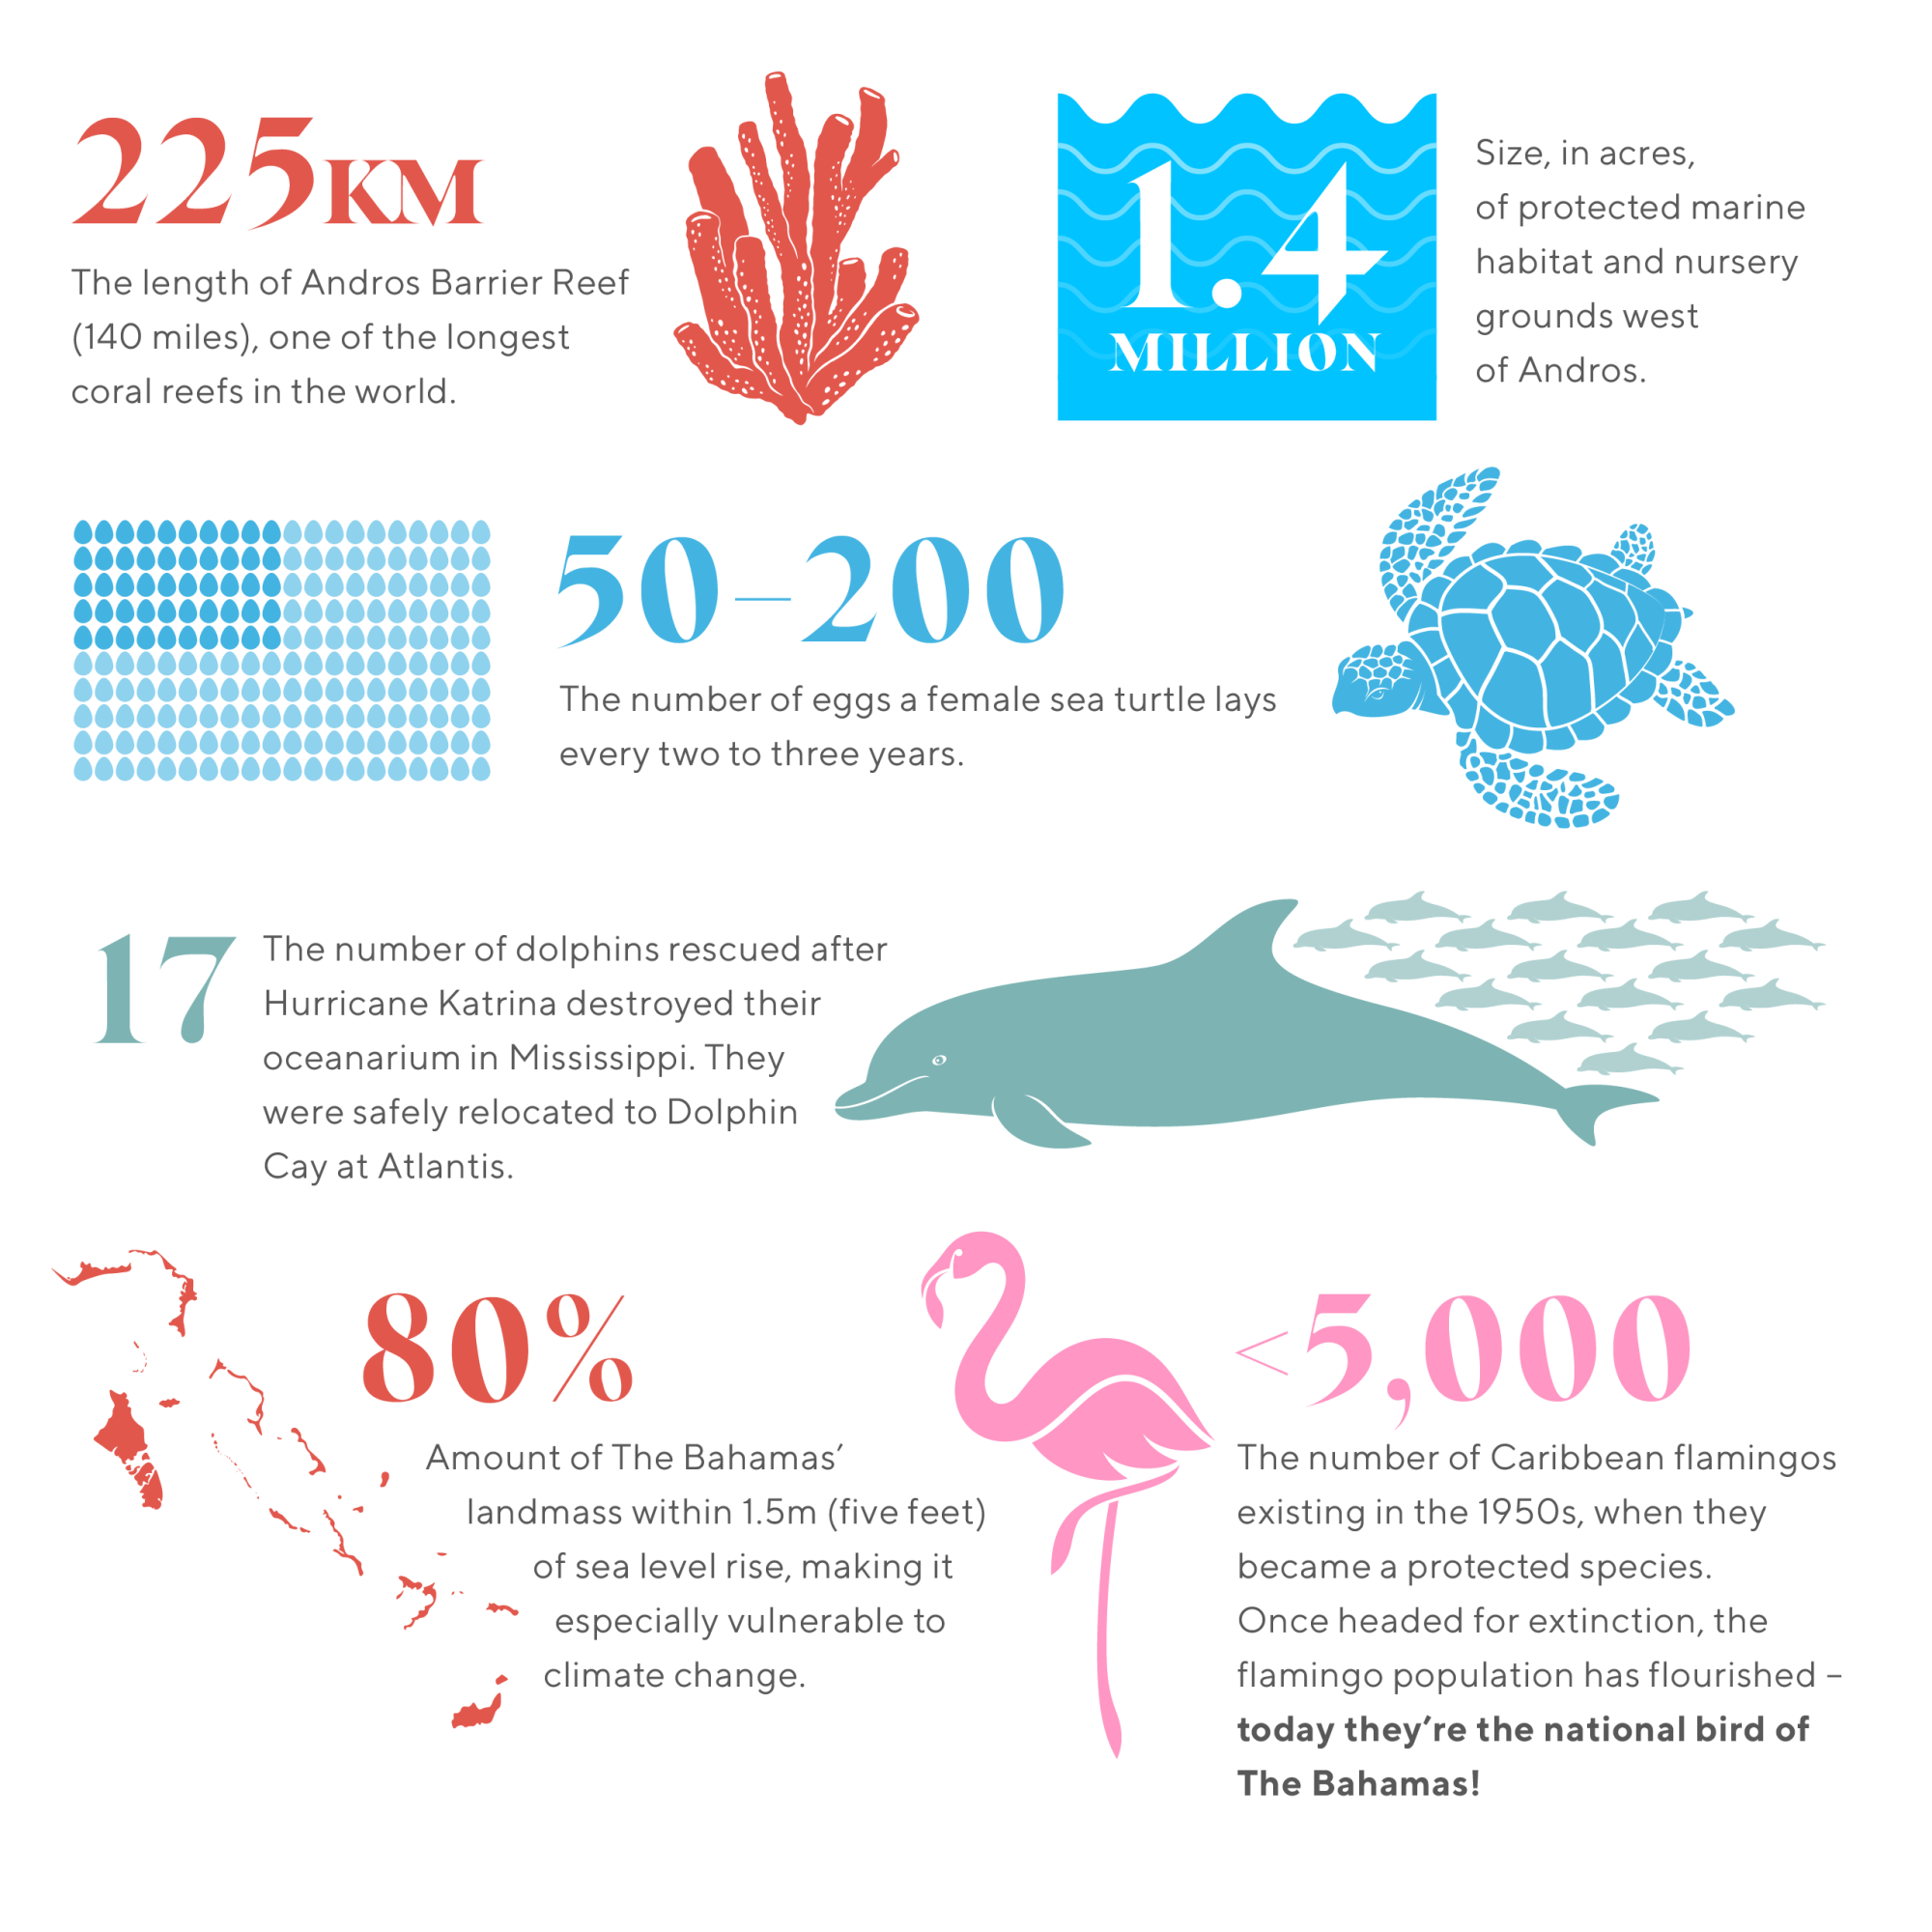 infographic featuring numbers about sustainability in the bahamas